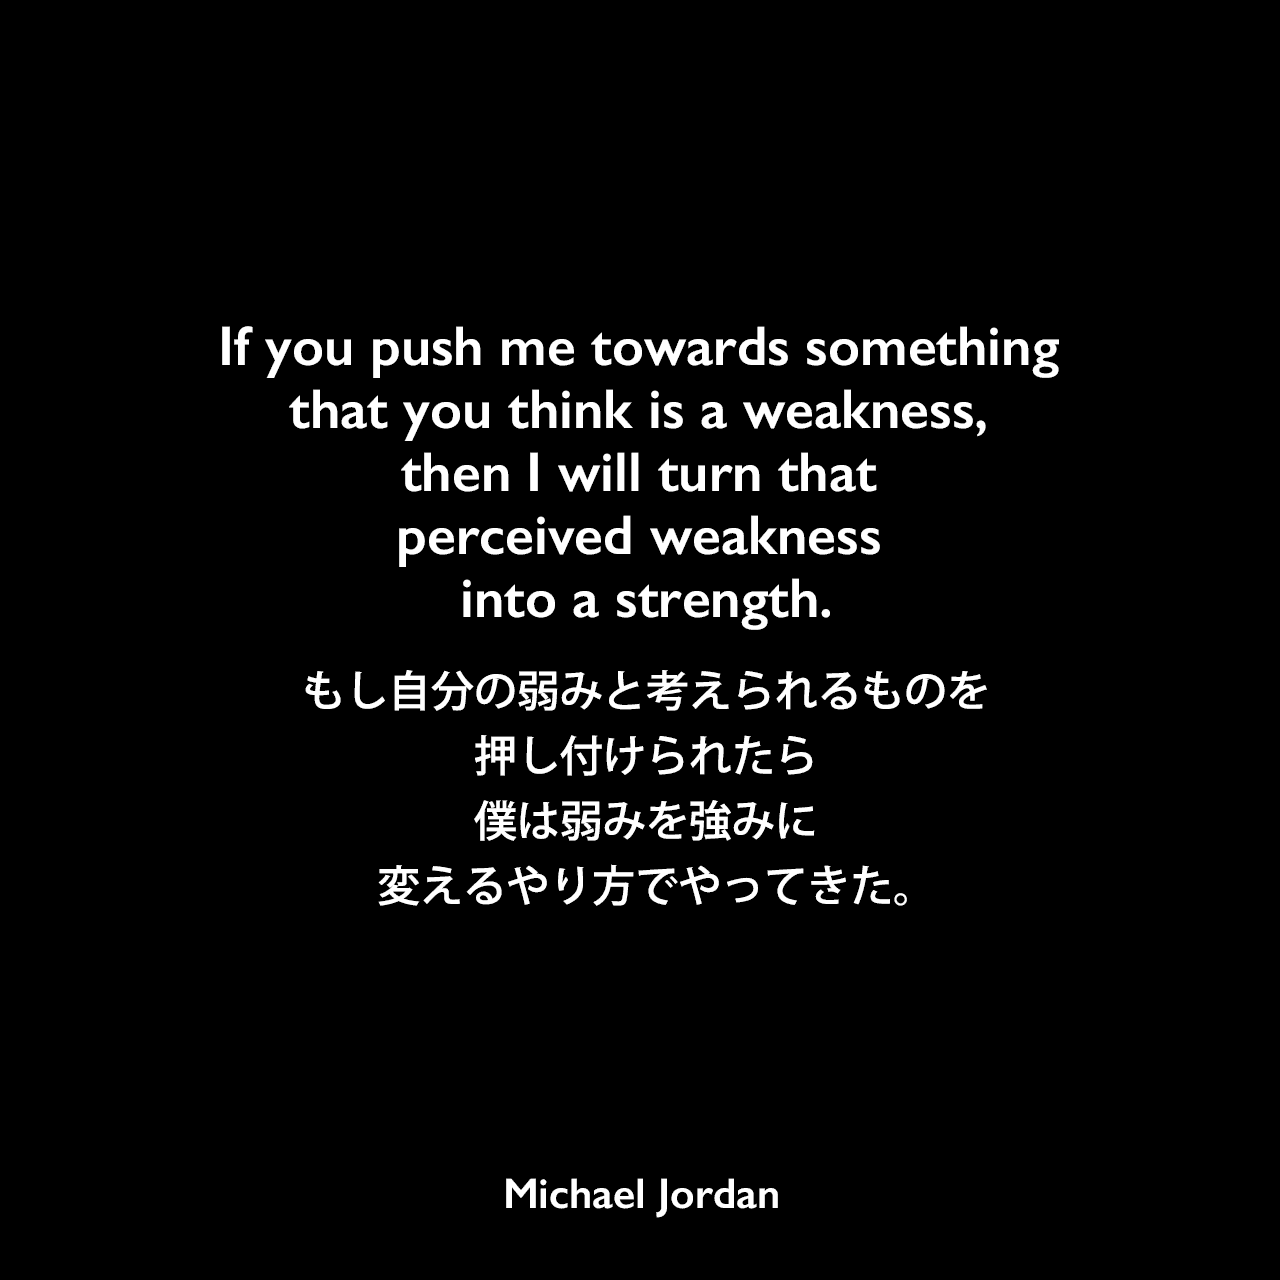 If you push me towards something that you think is a weakness, then I will turn that perceived weakness into a strength.もし自分の弱みと考えられるものを押し付けられたら、僕は弱みを強みに変えるやり方でやってきた。Michael Jordan